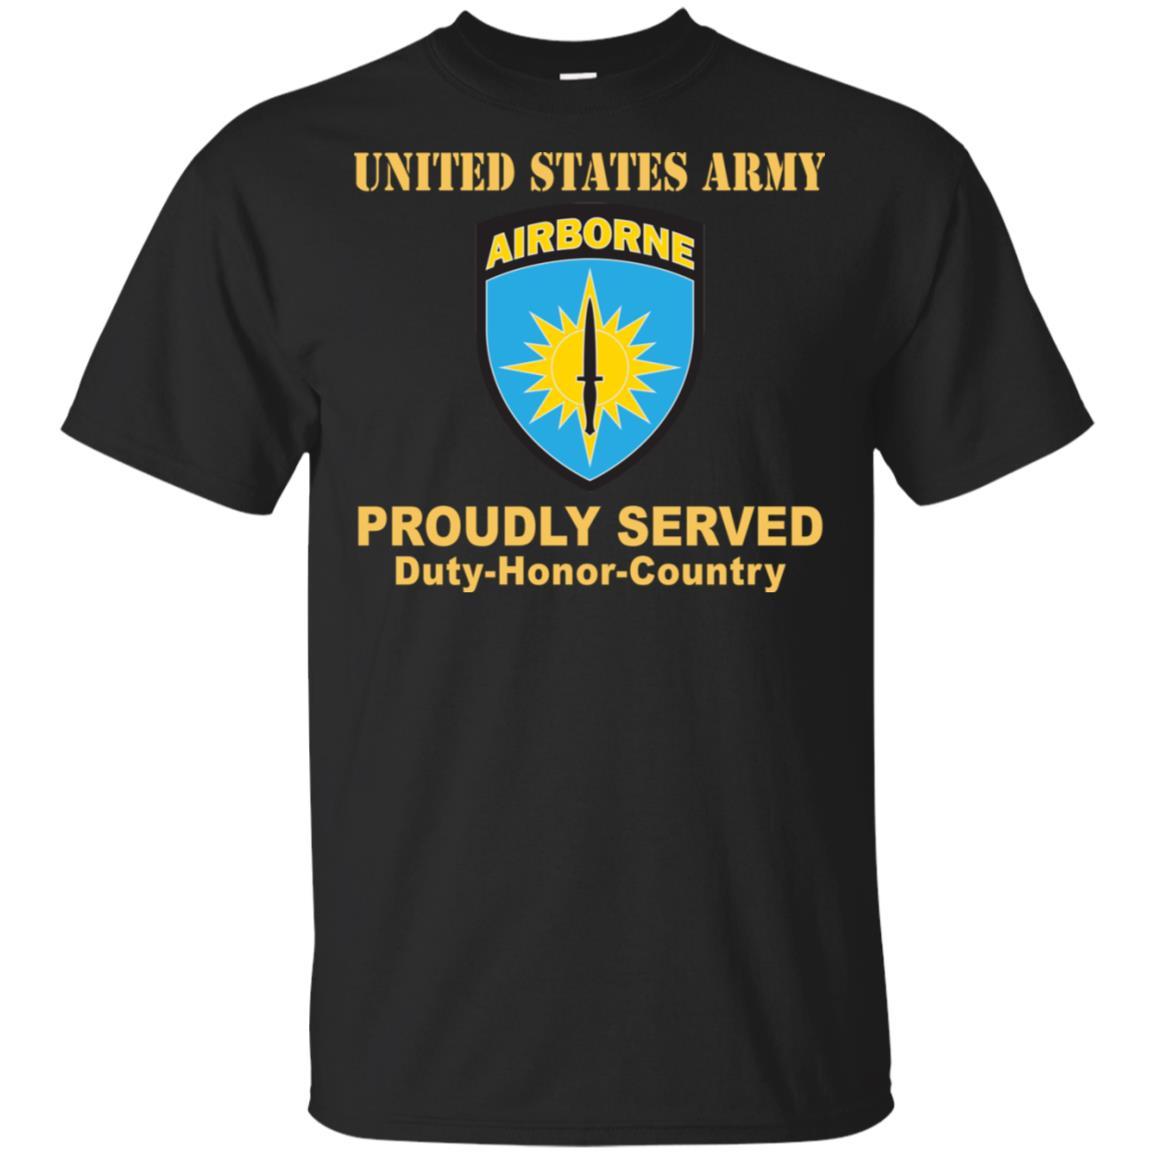 US ARMY SPECIAL OPERATIONS COMMAND PACIFIC- Proudly Served T-Shirt On Front For Men-TShirt-Army-Veterans Nation